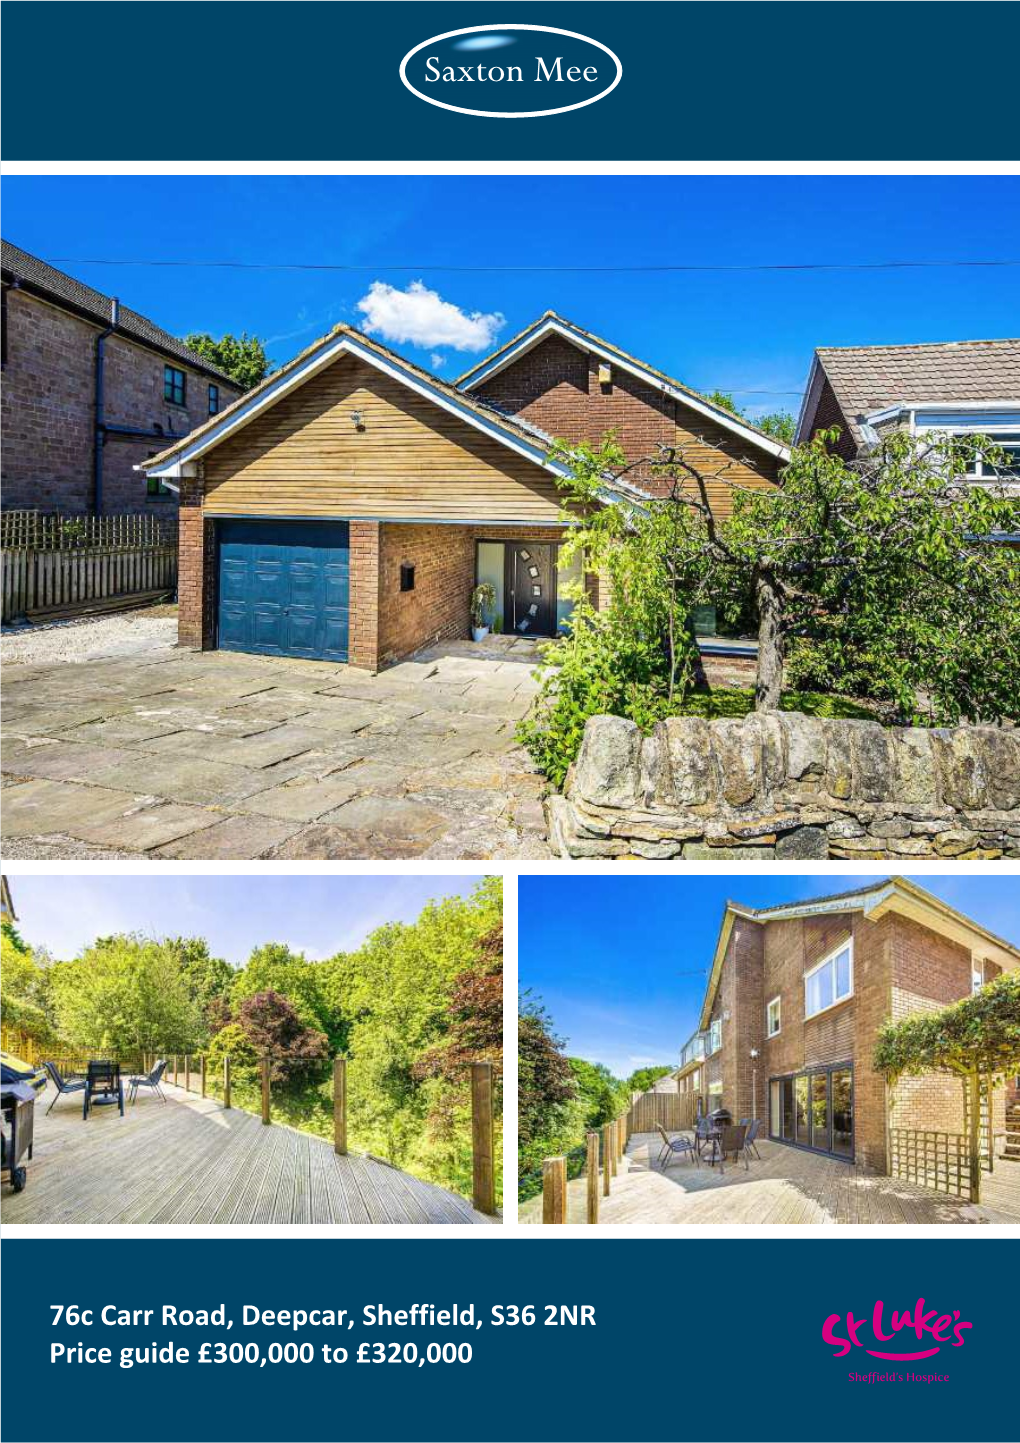 76C Carr Road, Deepcar, Sheffield, S36 2NR Price Guide £300,000 to £320,000 She Ield’S Hospice 76C Carr Road Deepcar Price Guide £300,000 to £320,000